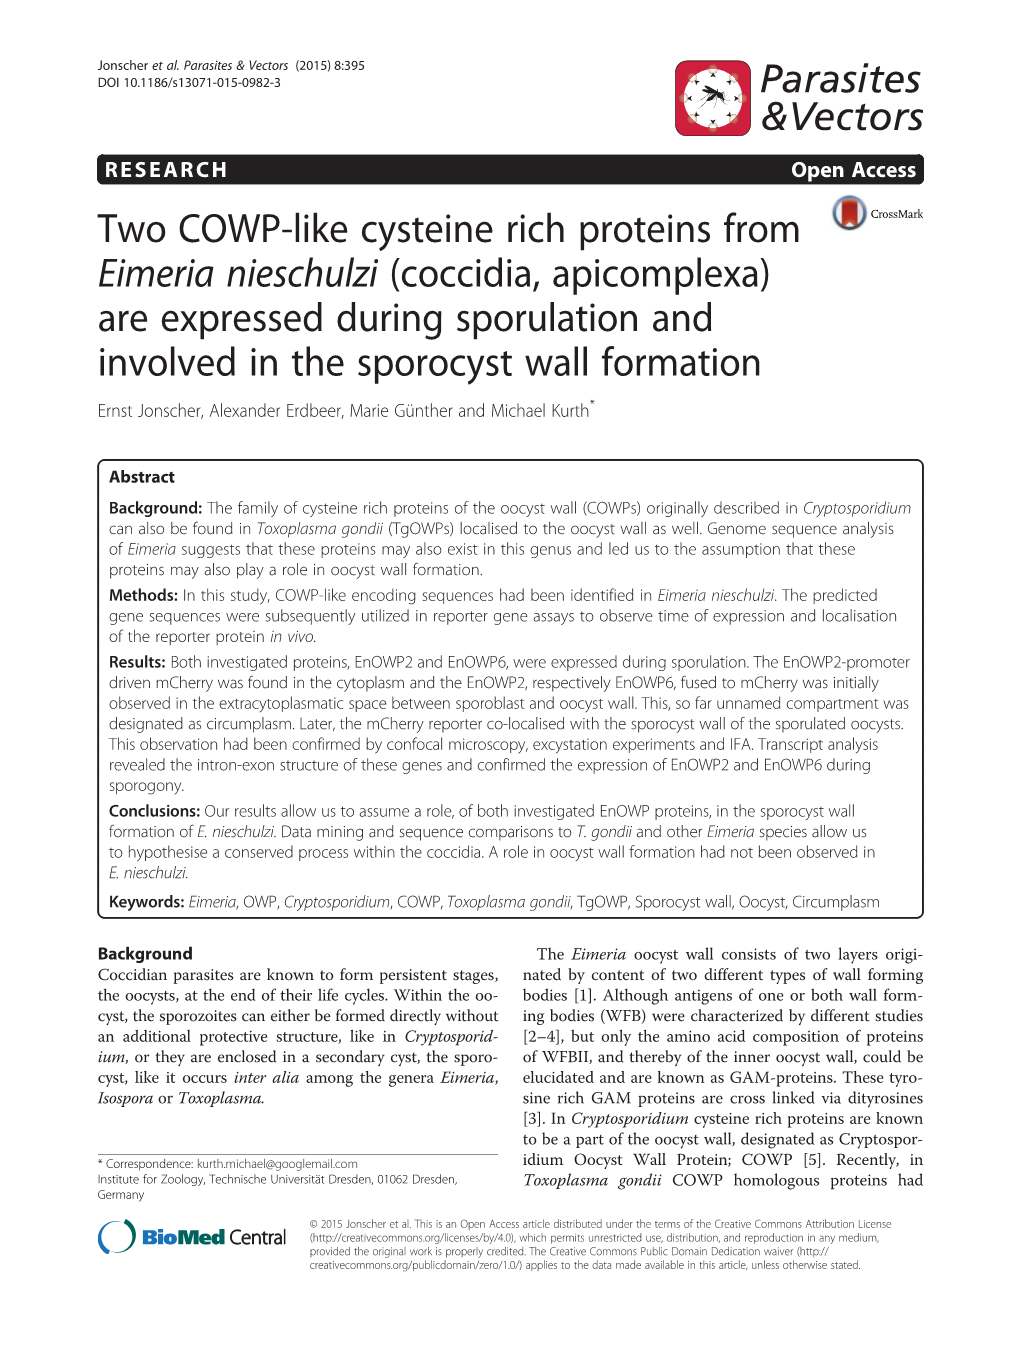 Two COWP-Like Cysteine Rich Proteins from Eimeria Nieschulzi (Coccidia